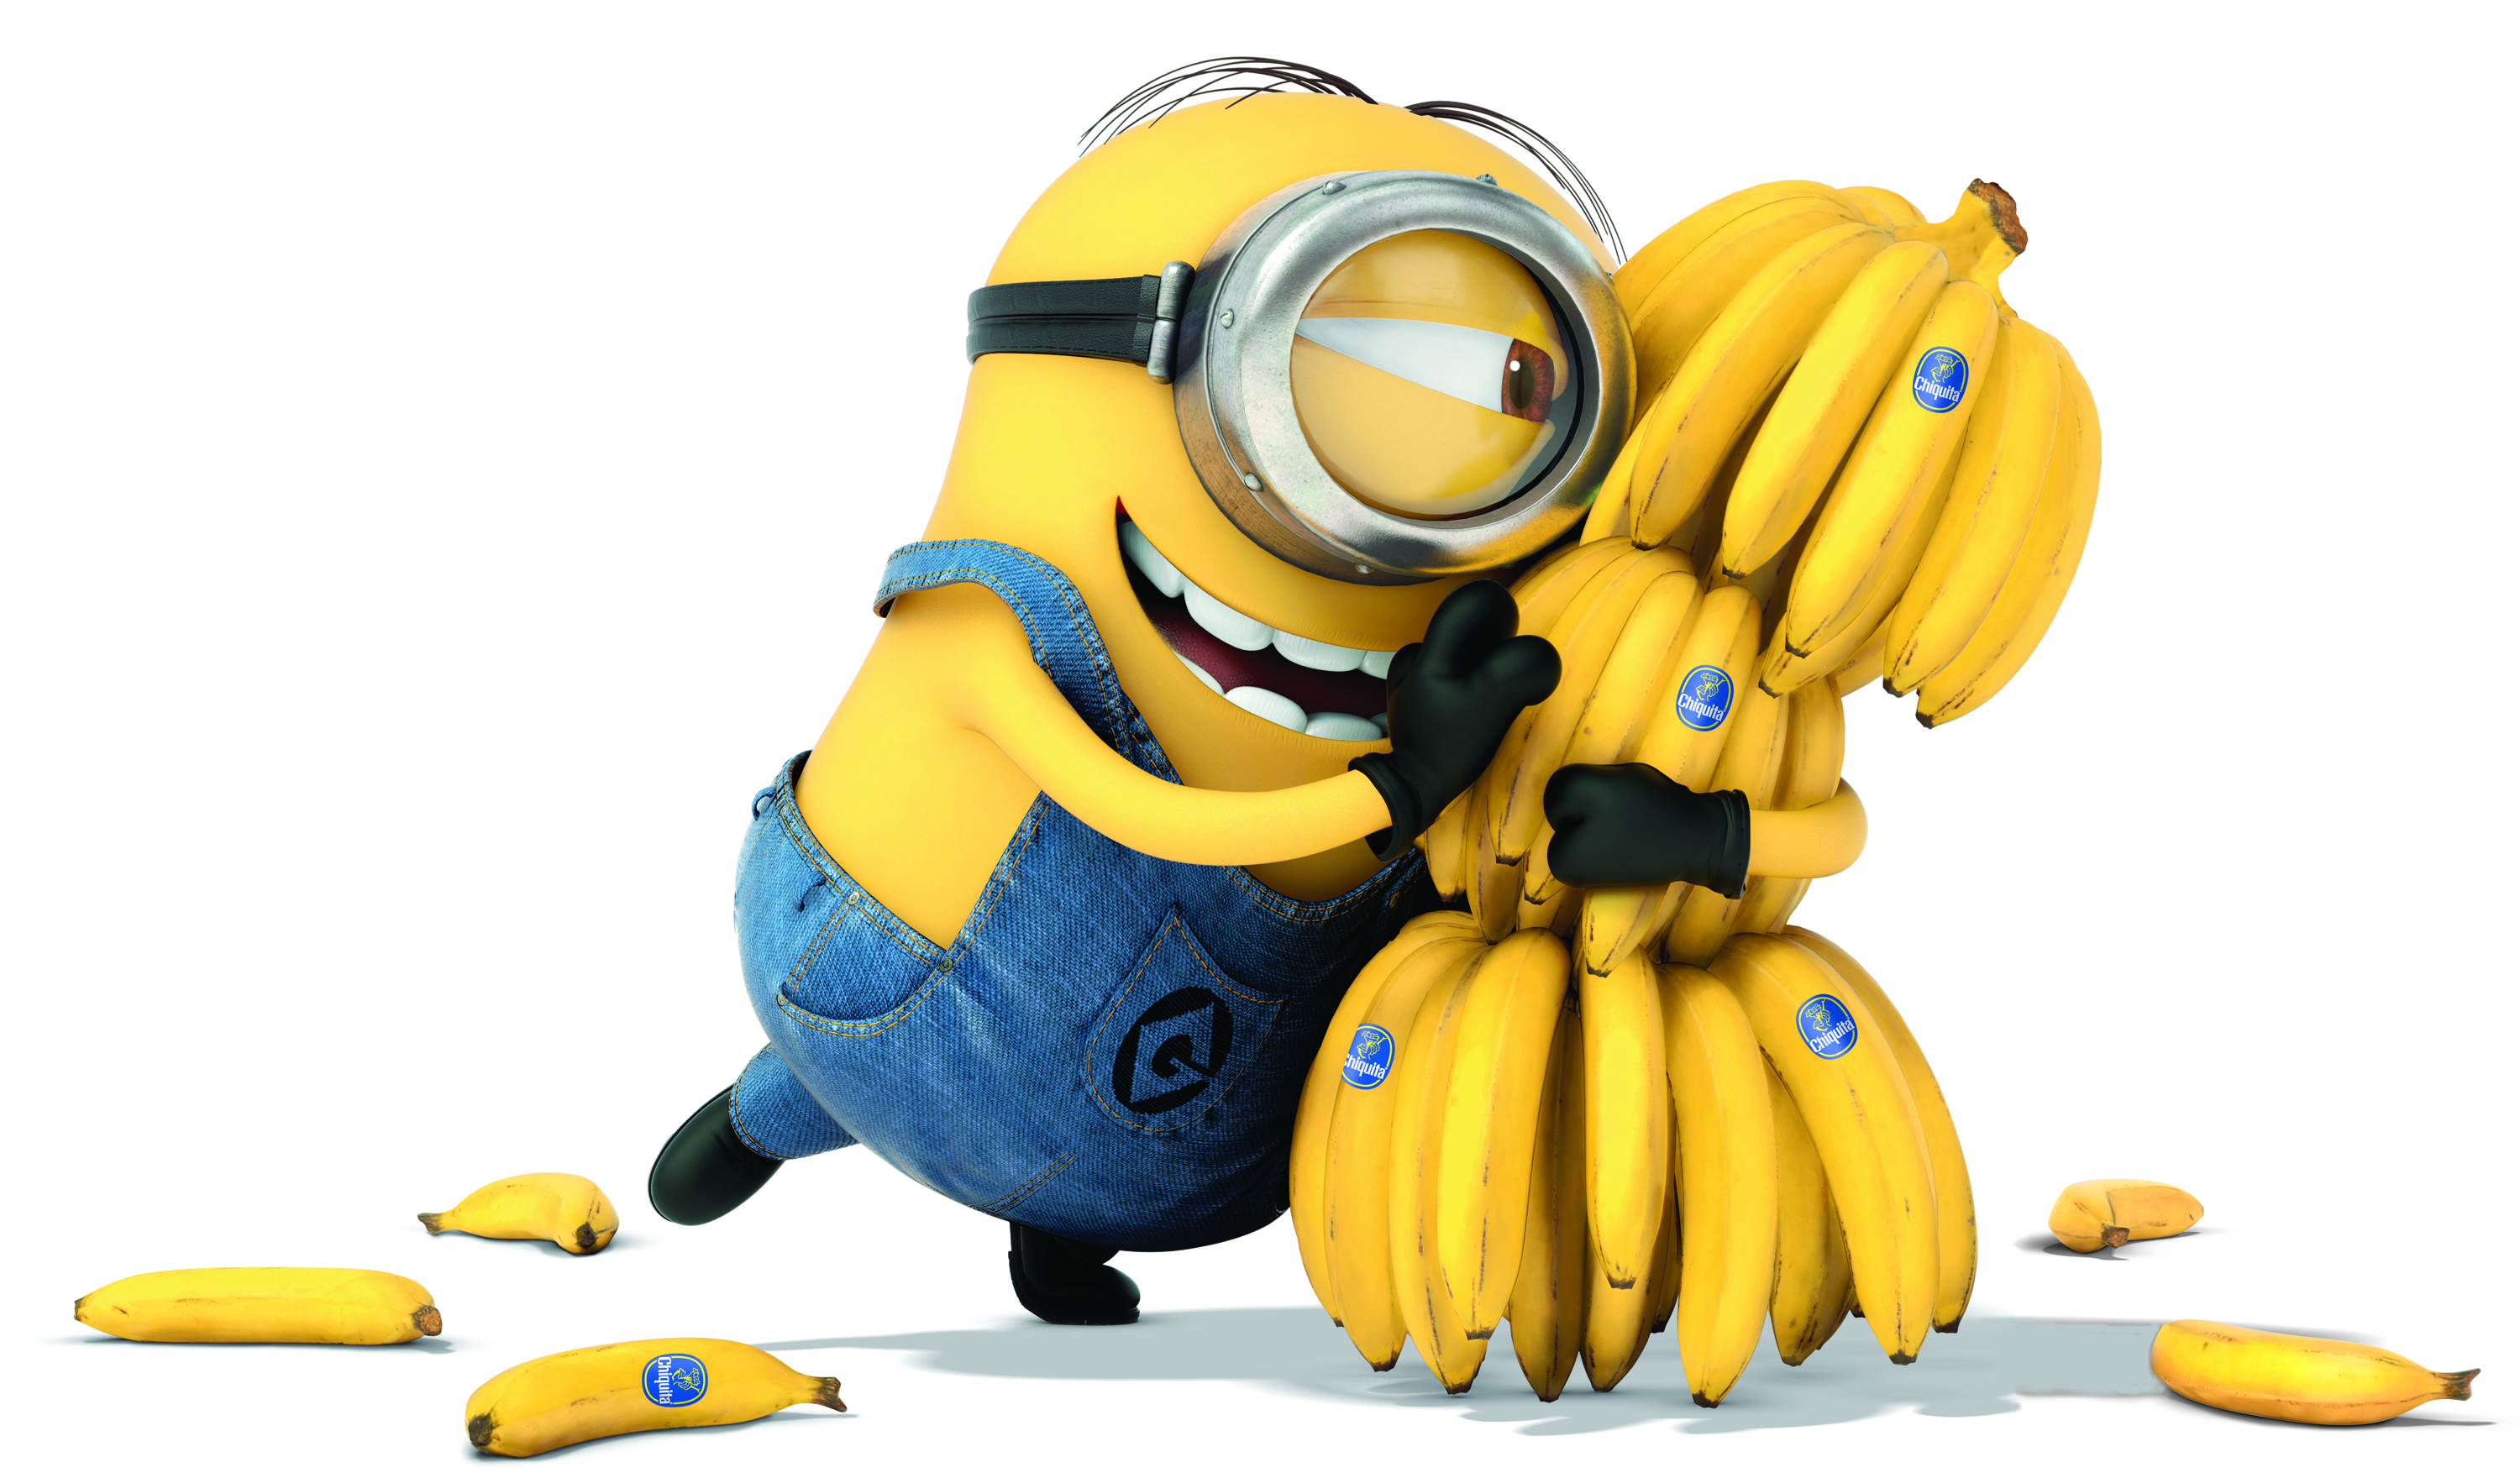 Your Fallout 4 lunch Love-banana-minions